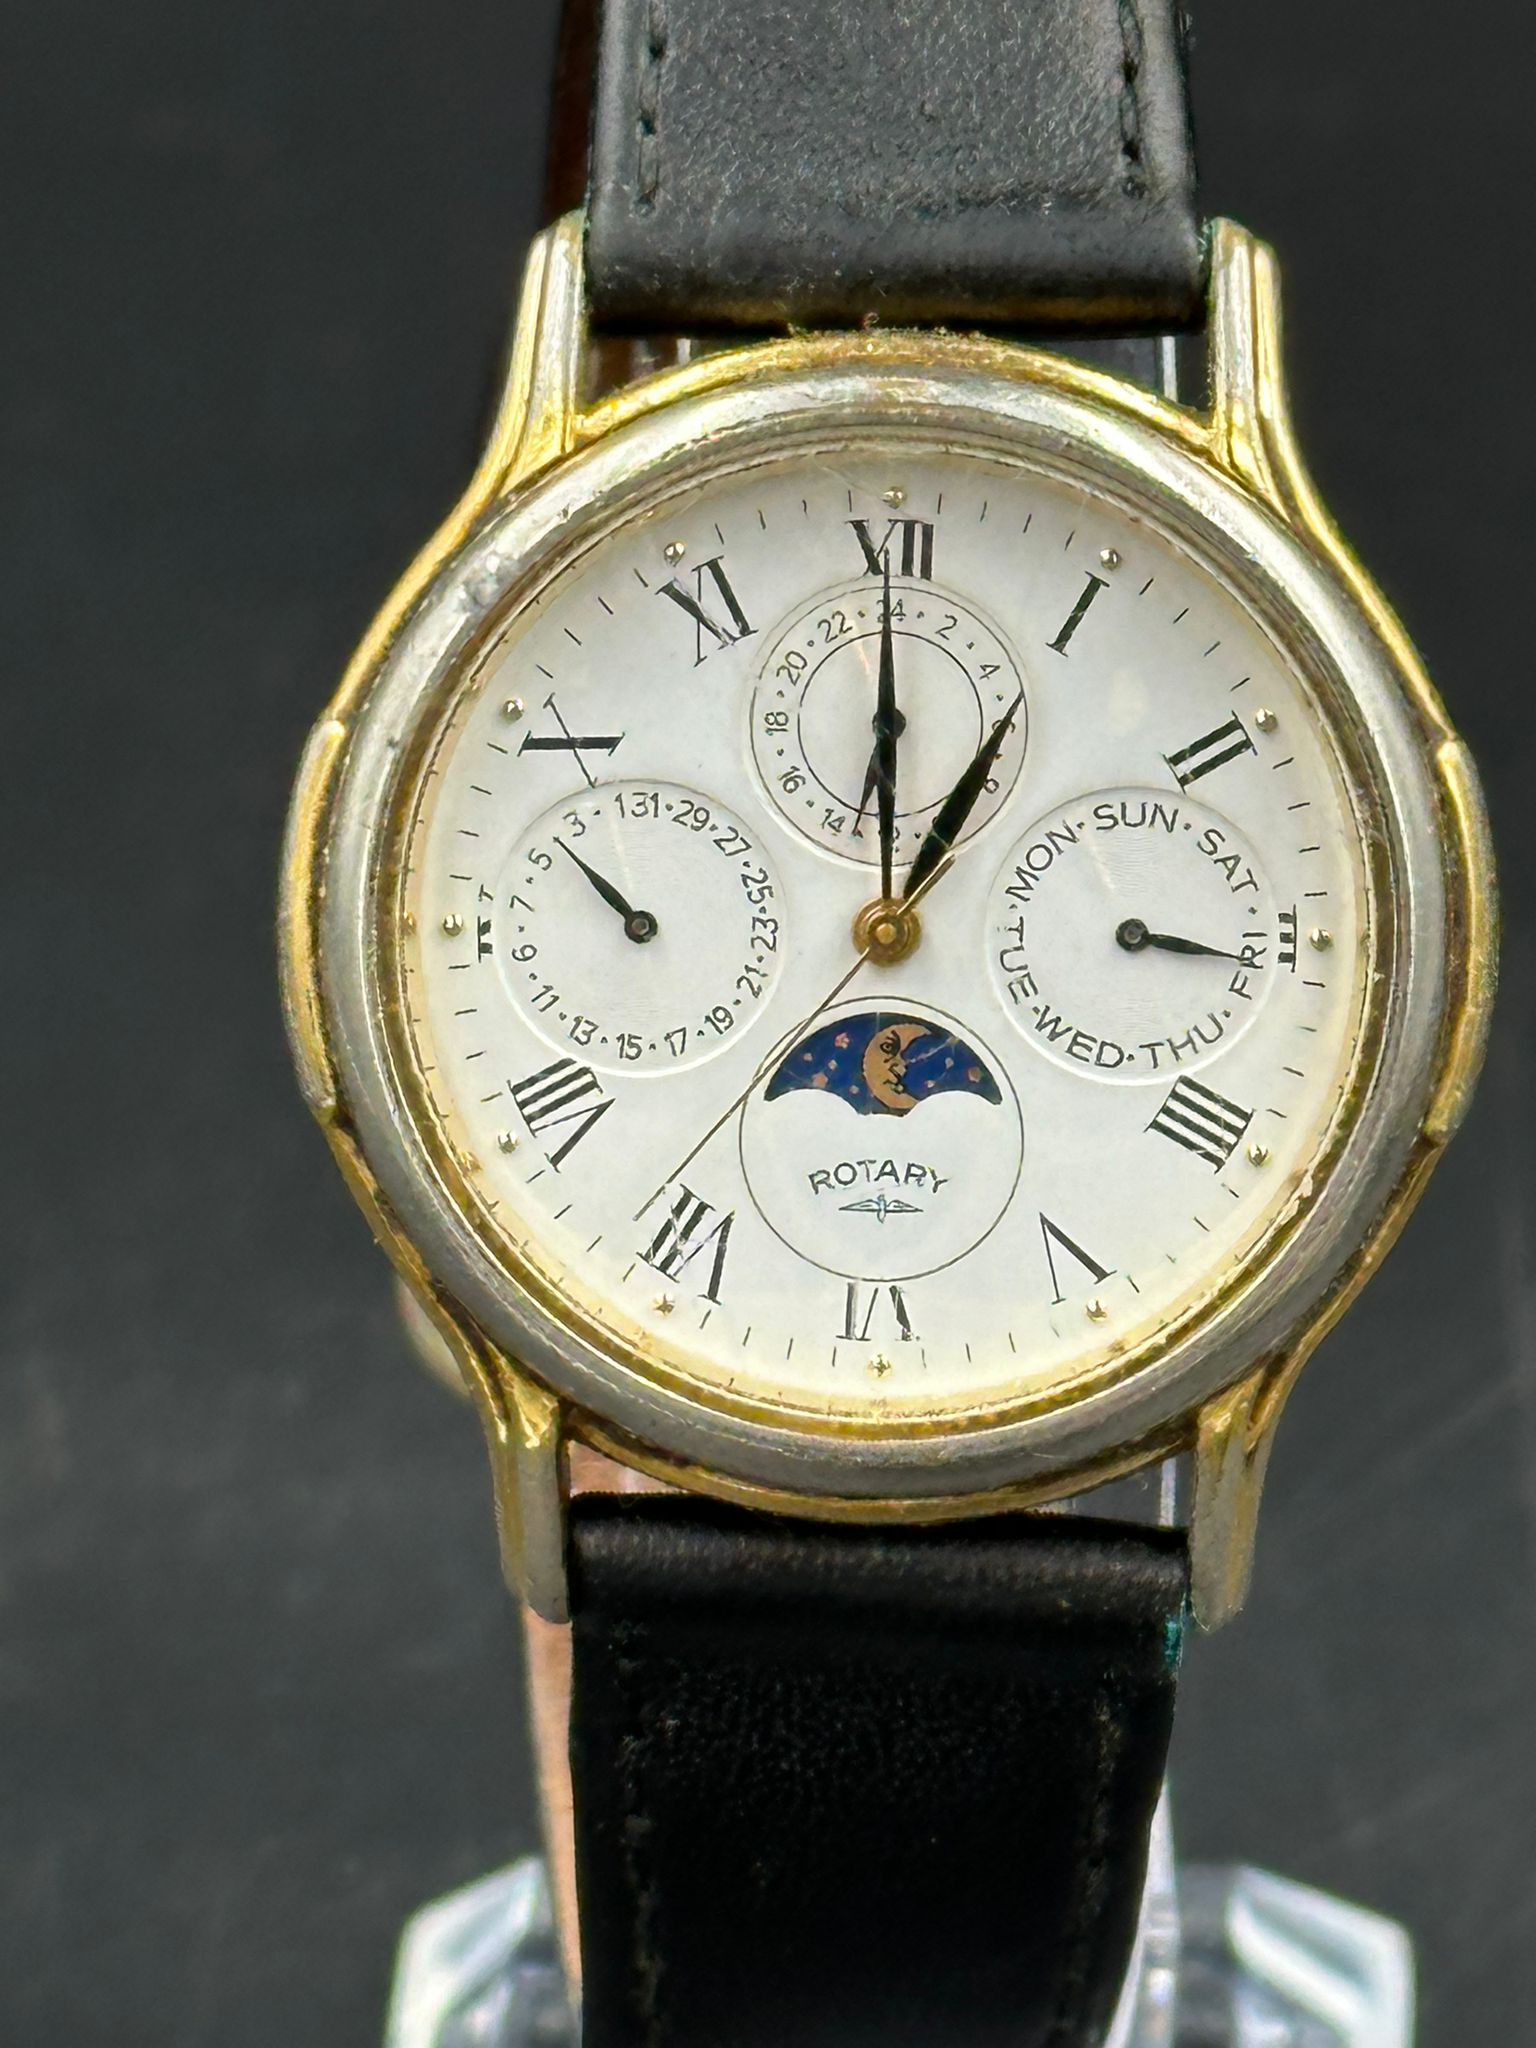 A Rotary, moon face watch. - Image 2 of 2